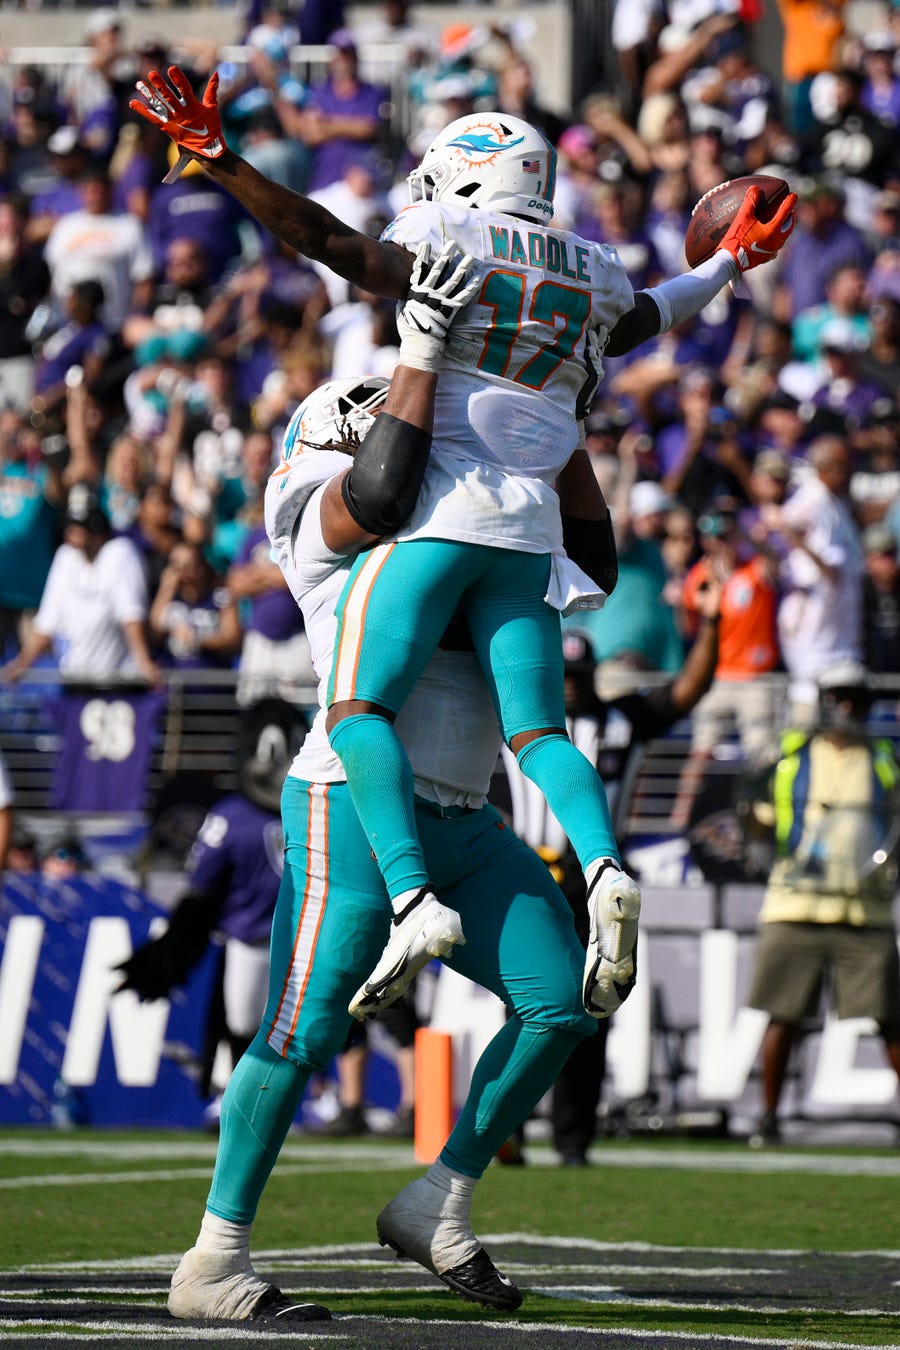 Miami Dolphins wide receiver Jaylen Waddle (17) celebrates after a touchdown during the second half of an NFL football game against the Baltimore Ravens, Sunday, Sept. 18, 2022, in Baltimore. (AP Photo/Nick Wass)